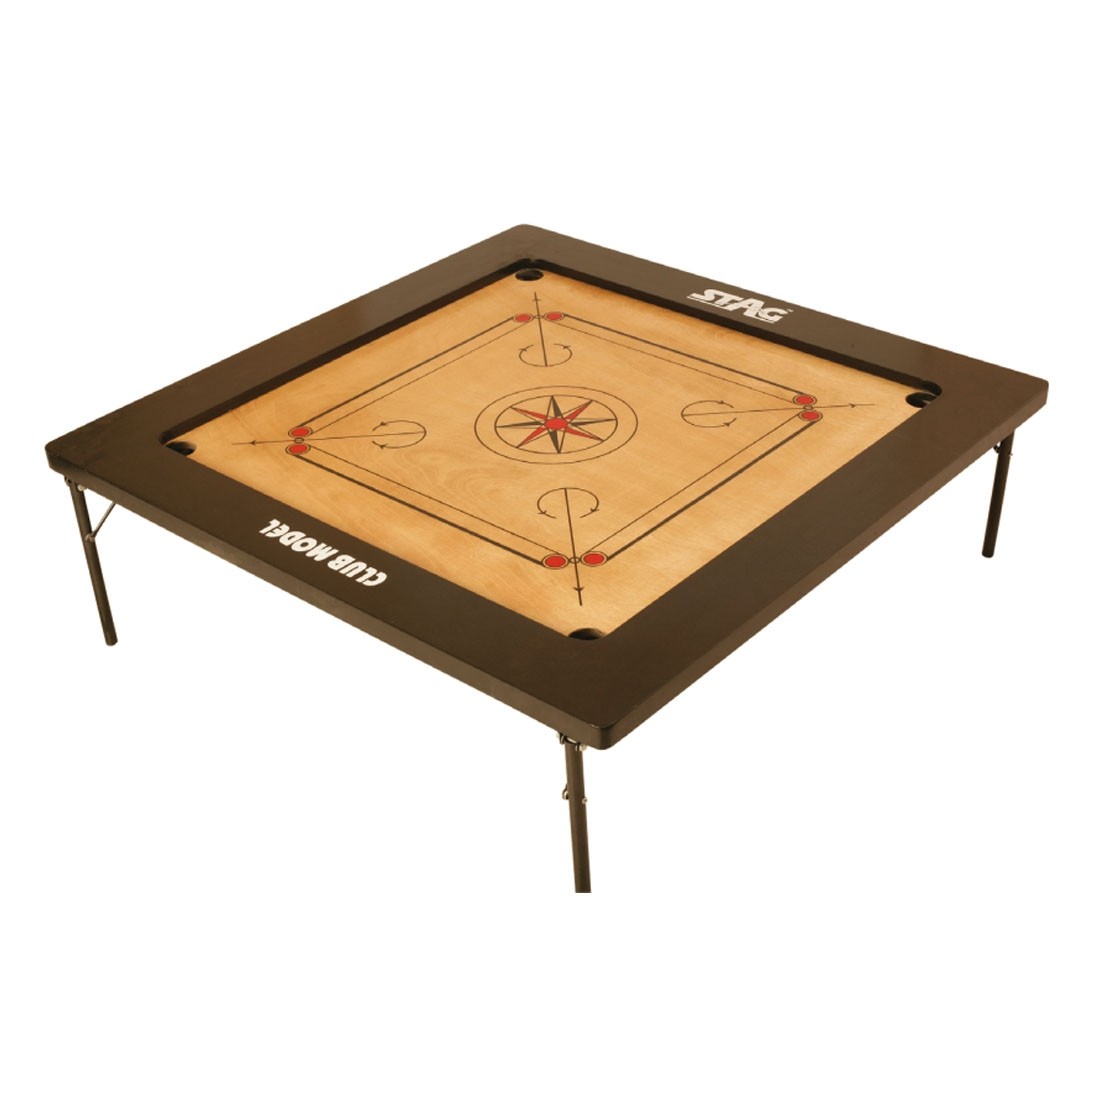 STAG CARROM BOARD HOBBY 1.5" BORDER 3MM M.D.F.